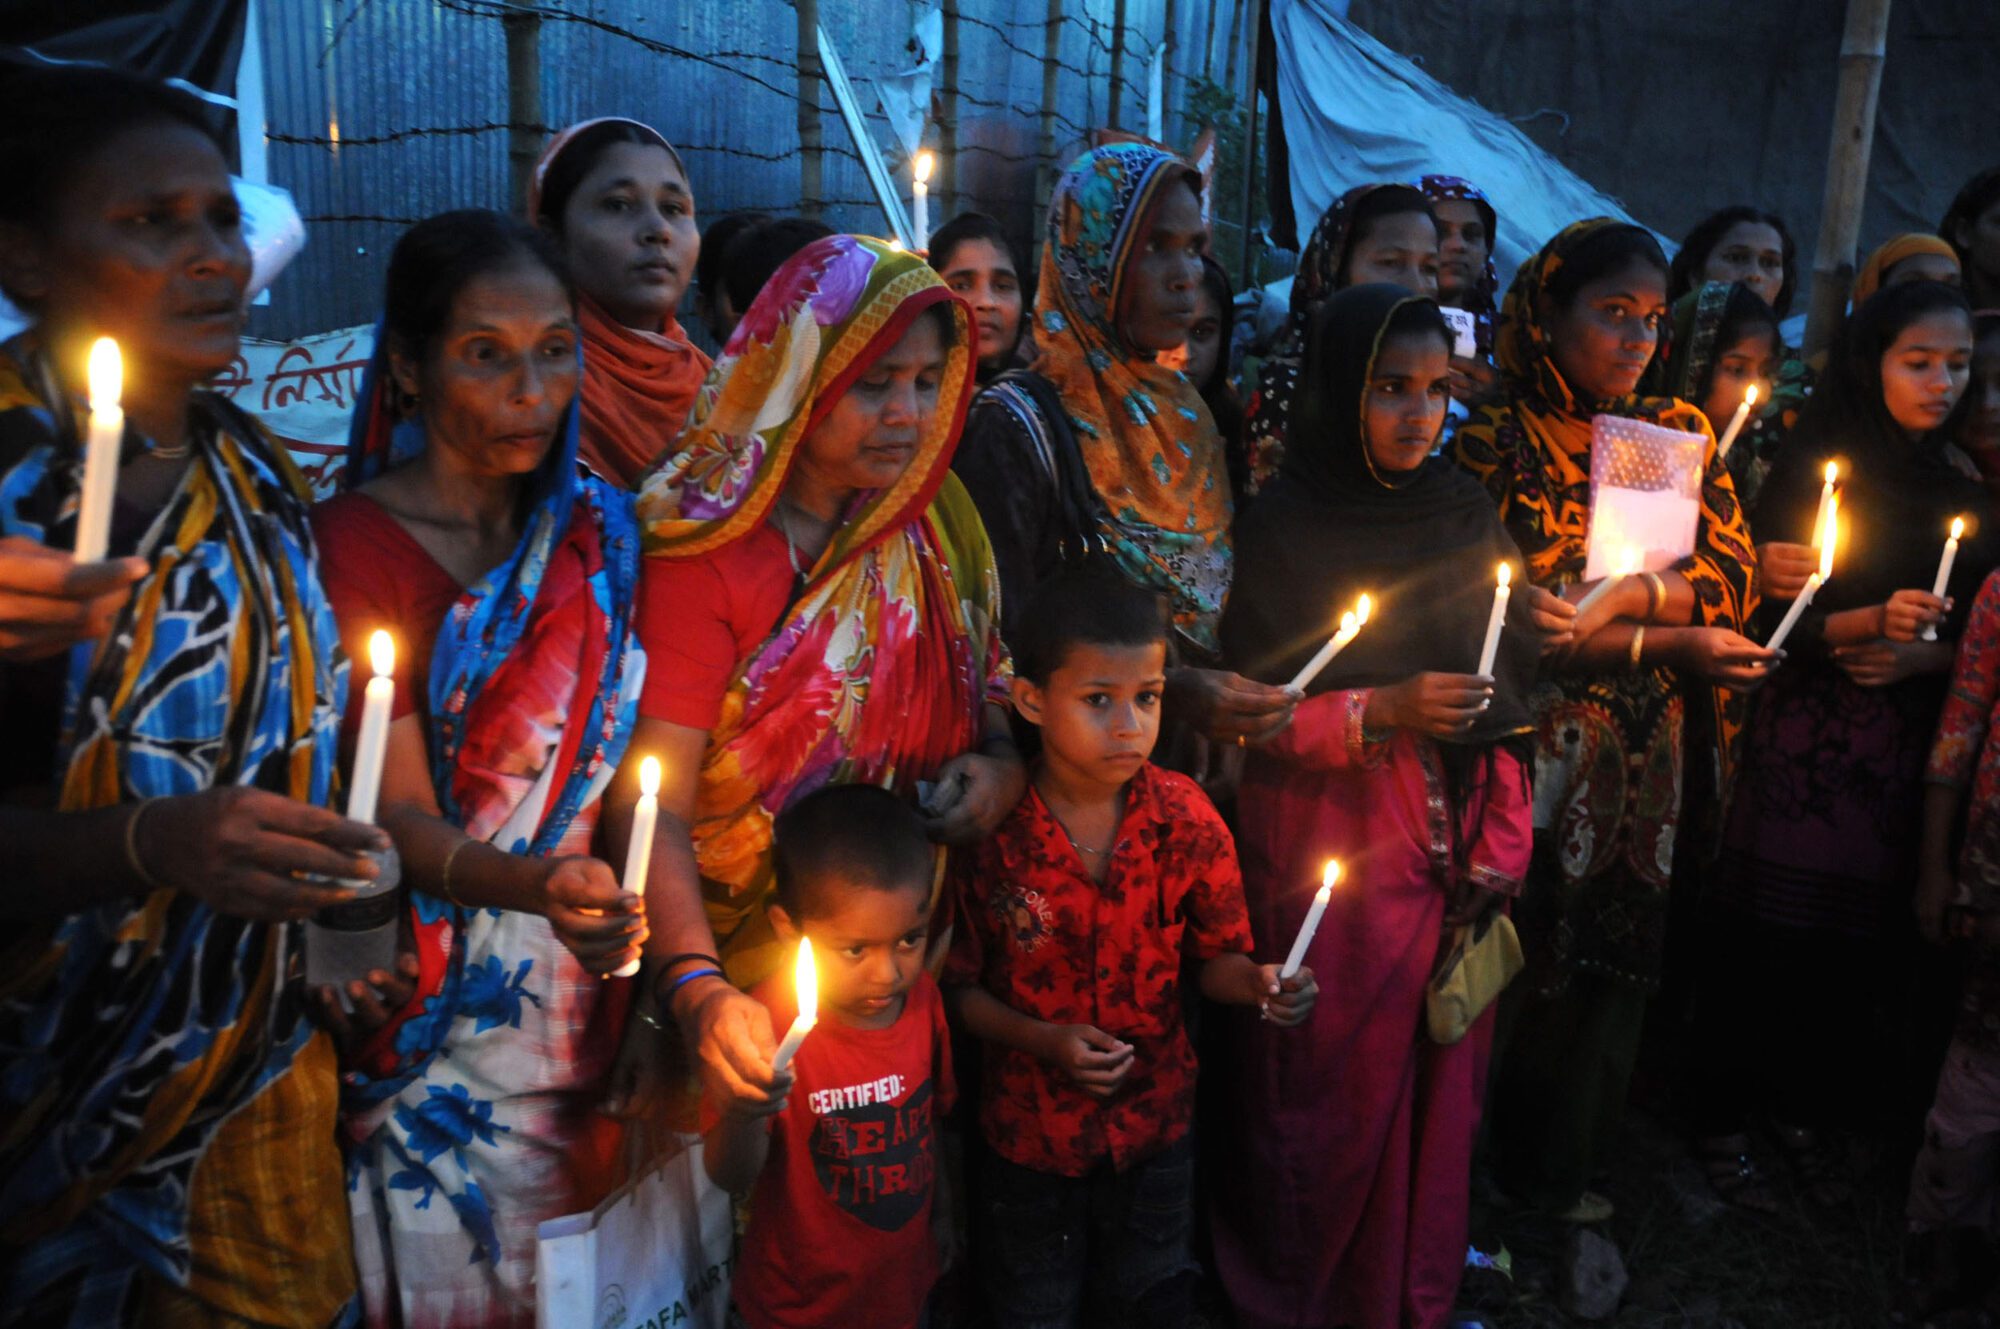 A group of women and children sombrely hold candles.